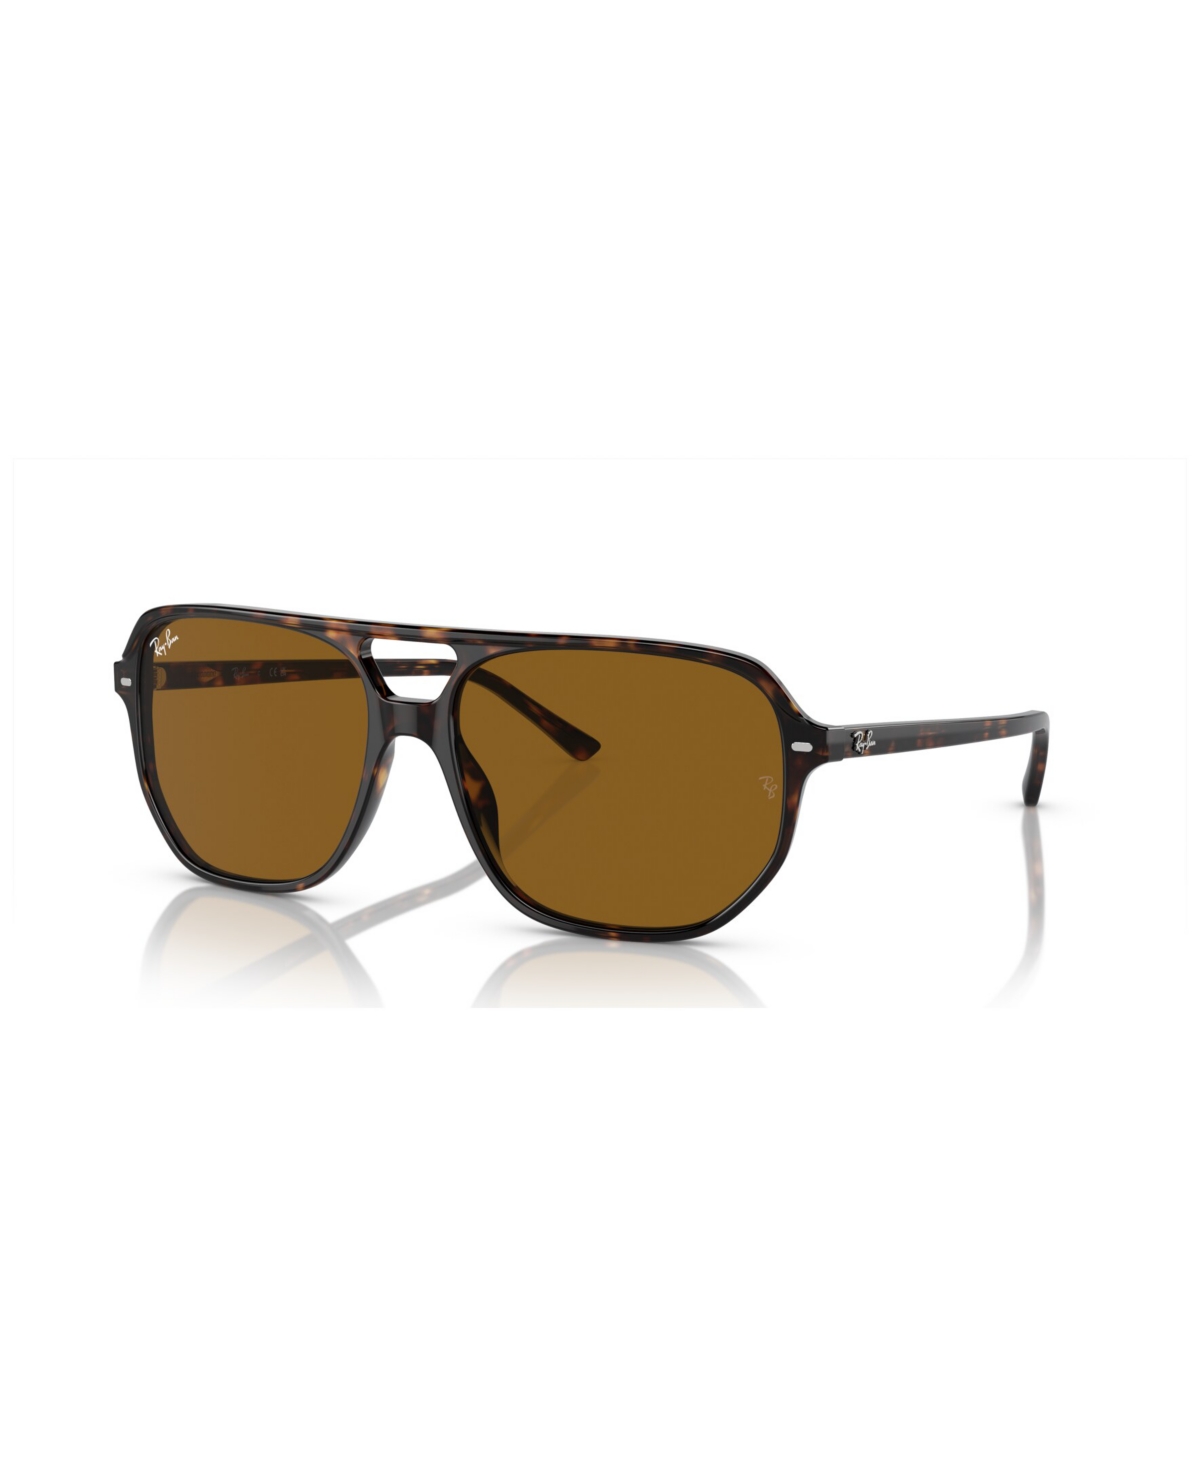 Ray Ban Unisex Bill One Sunglasses Rb2205 In Havana On Transparent Brown